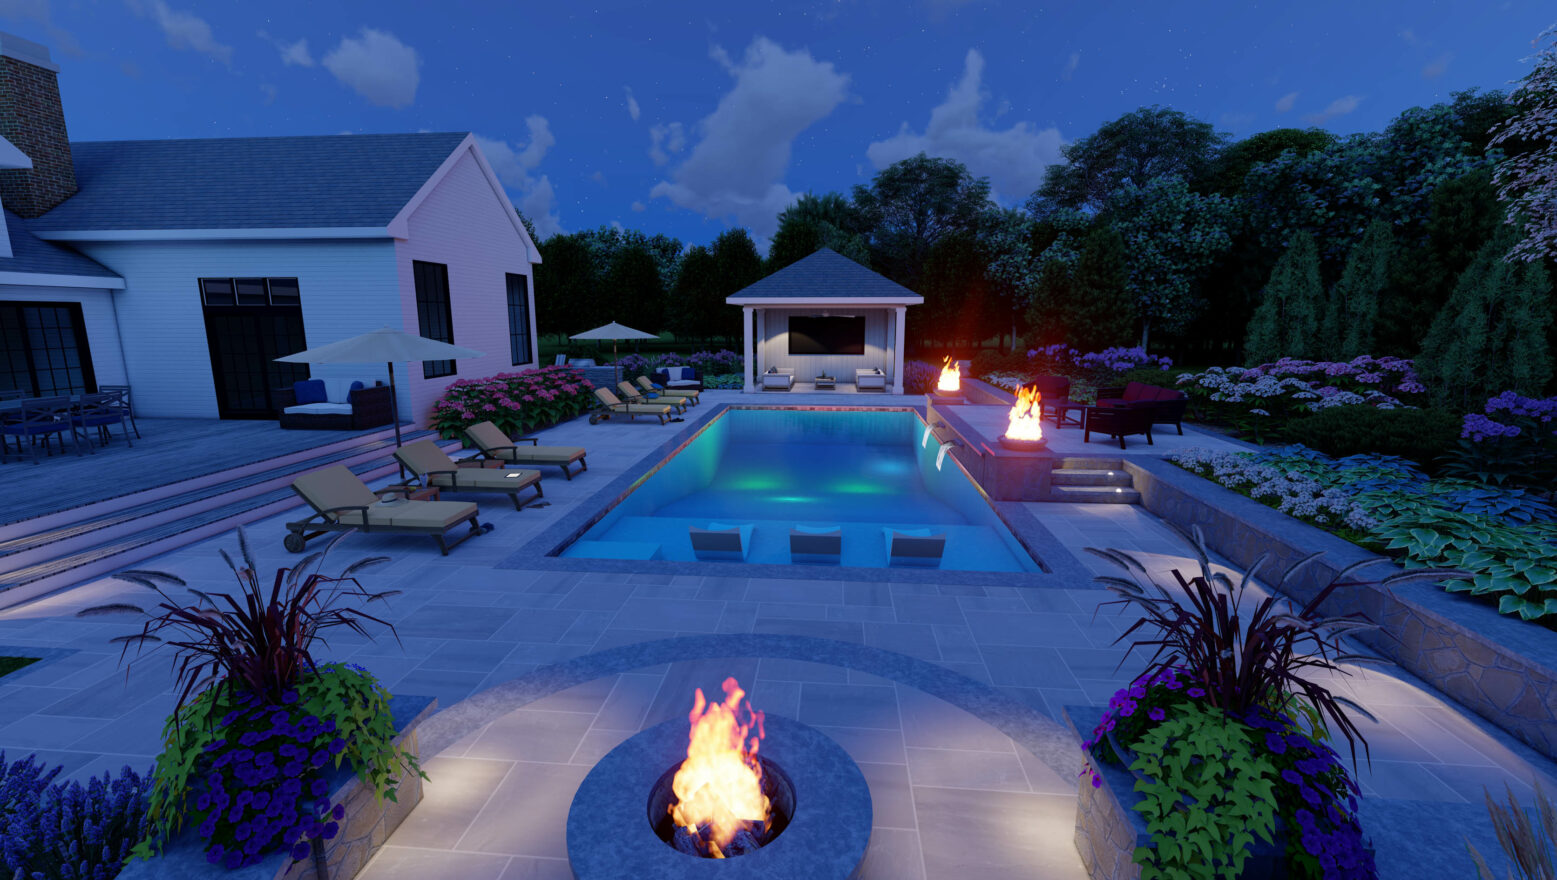 3D backyard pool concept with fire pits at night.